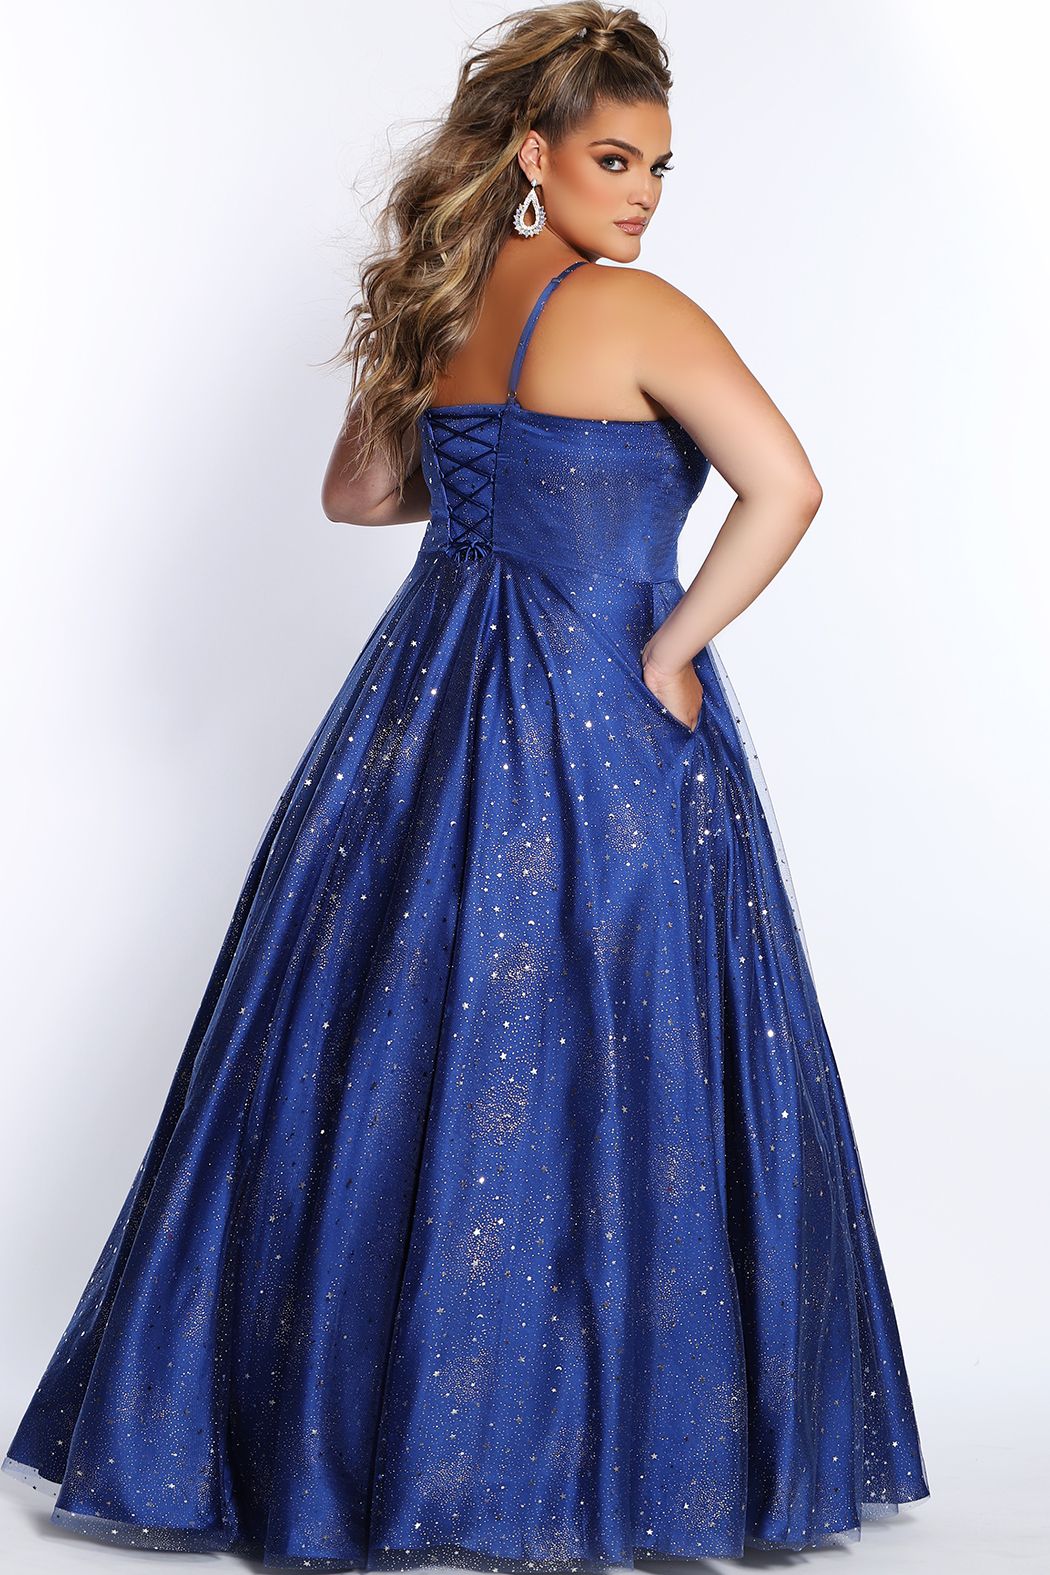 Sydney's Closet SC7326 Fabulous design details of this prom dress features adjustable spaghetti straps into a lace-up back with modesty panel keeps you supported all night. Bold in Blue and Purple, the tulle over satin skirt covered with silver stars, moons, and glitter will sparkle with every twirl. Complete with pockets! 